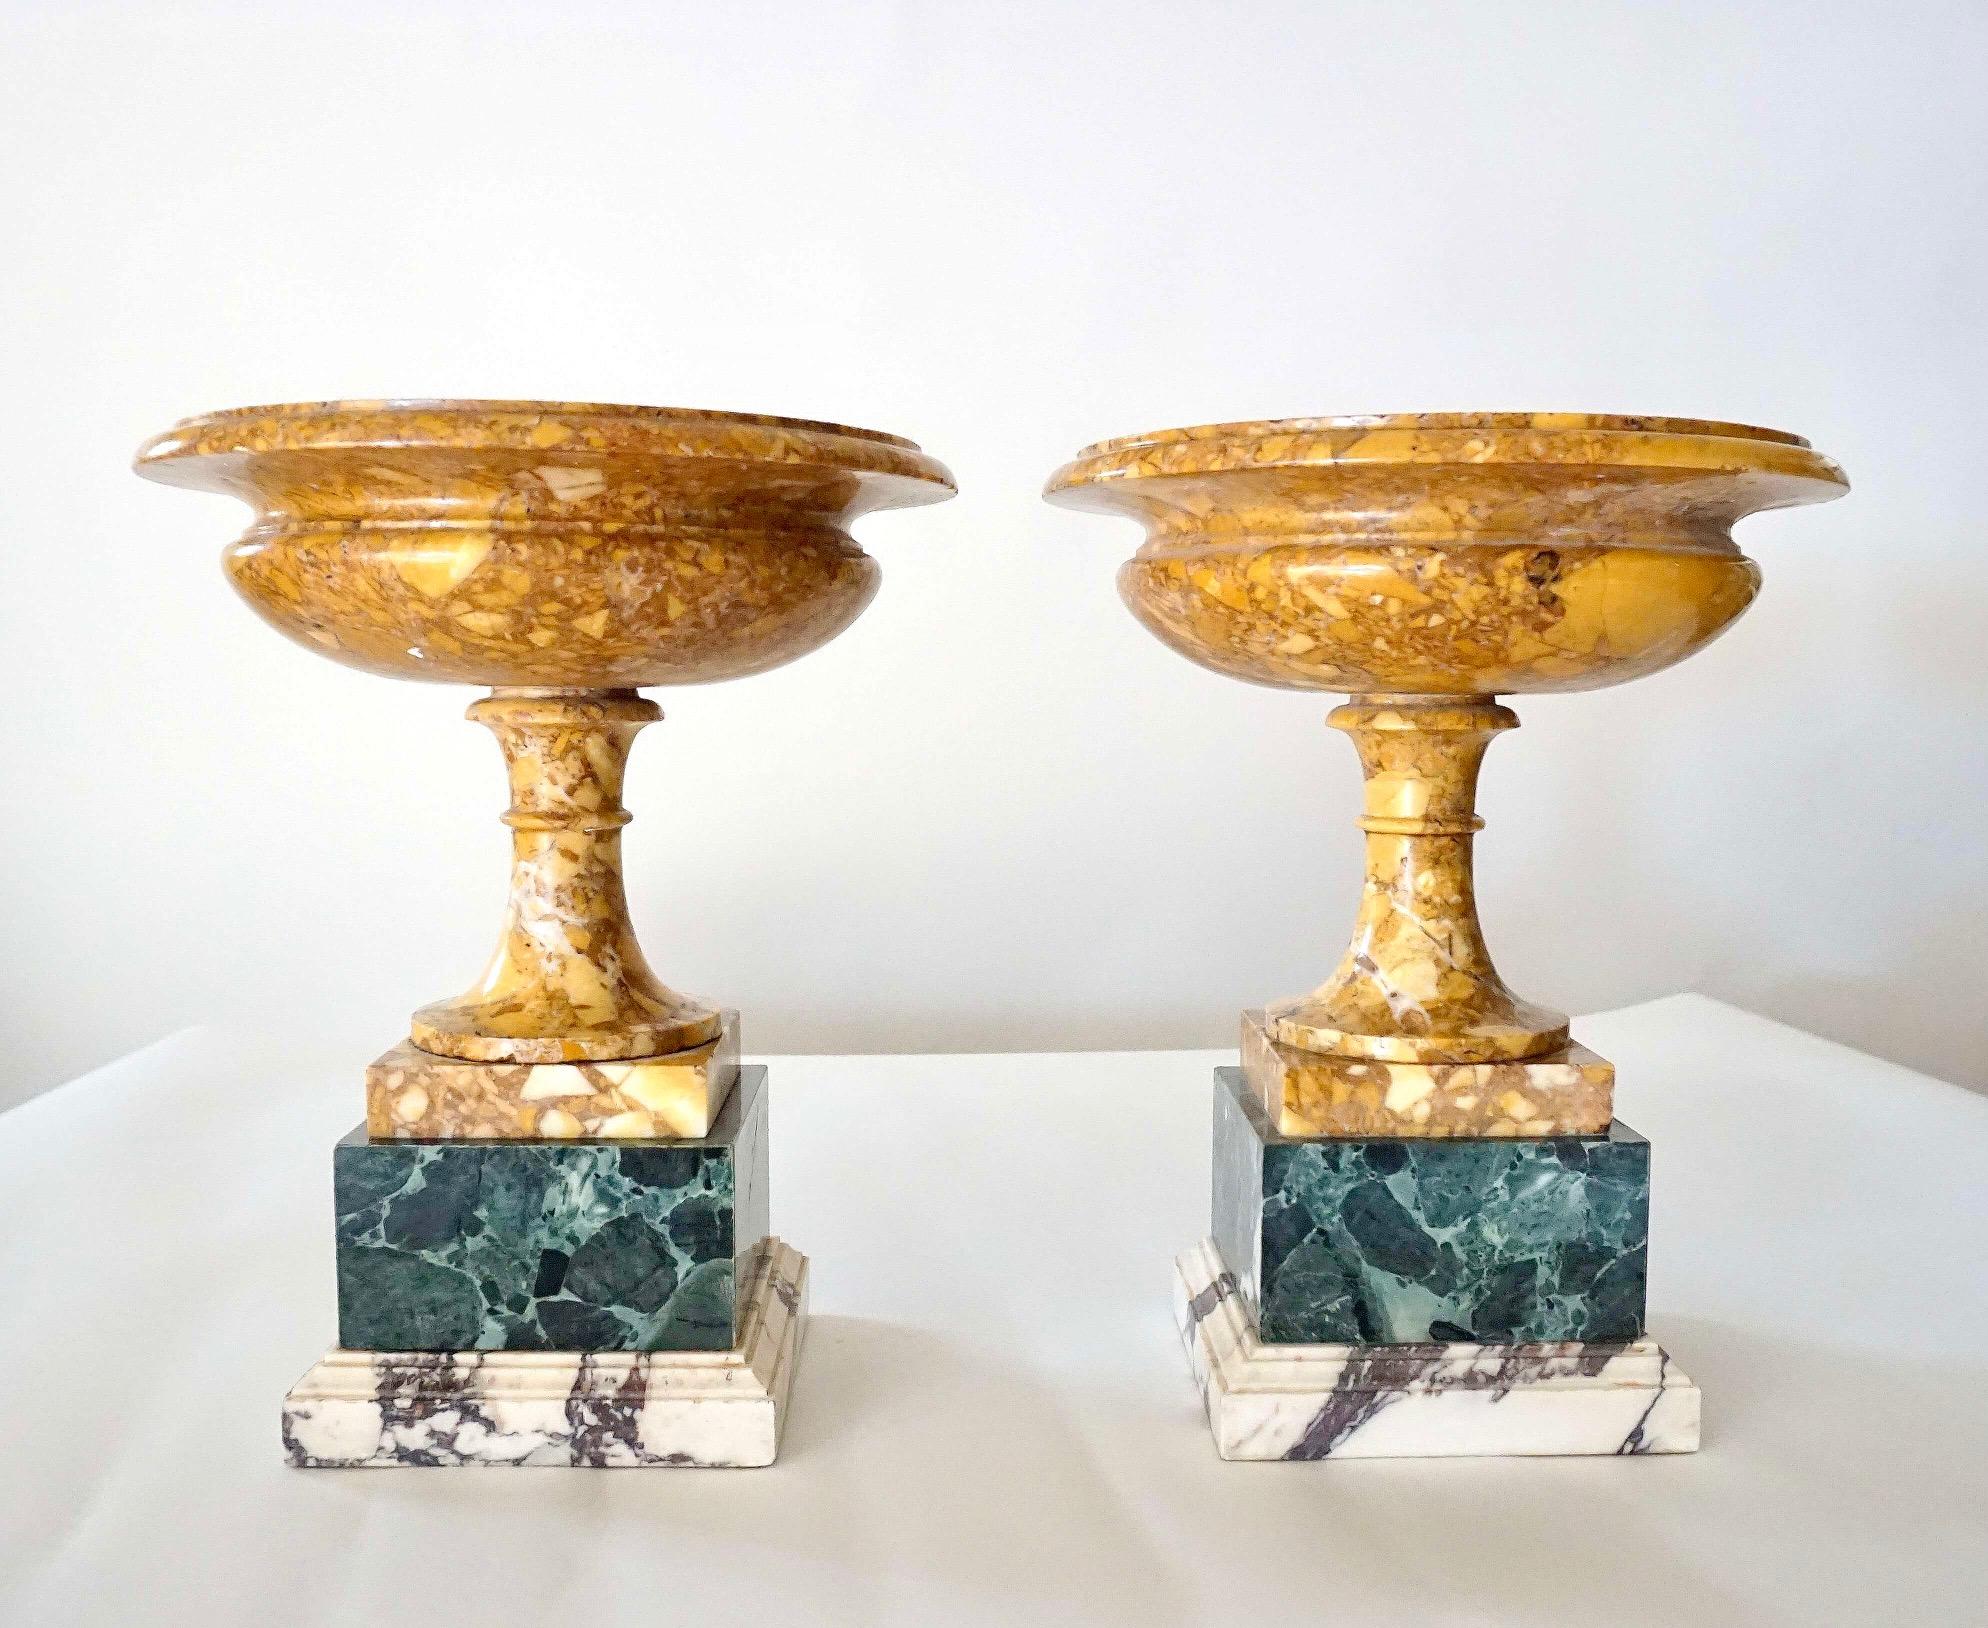 Grand Tour Pair of 19th Century Italian Neoclassical Tazze in Polychrome Marbles For Sale